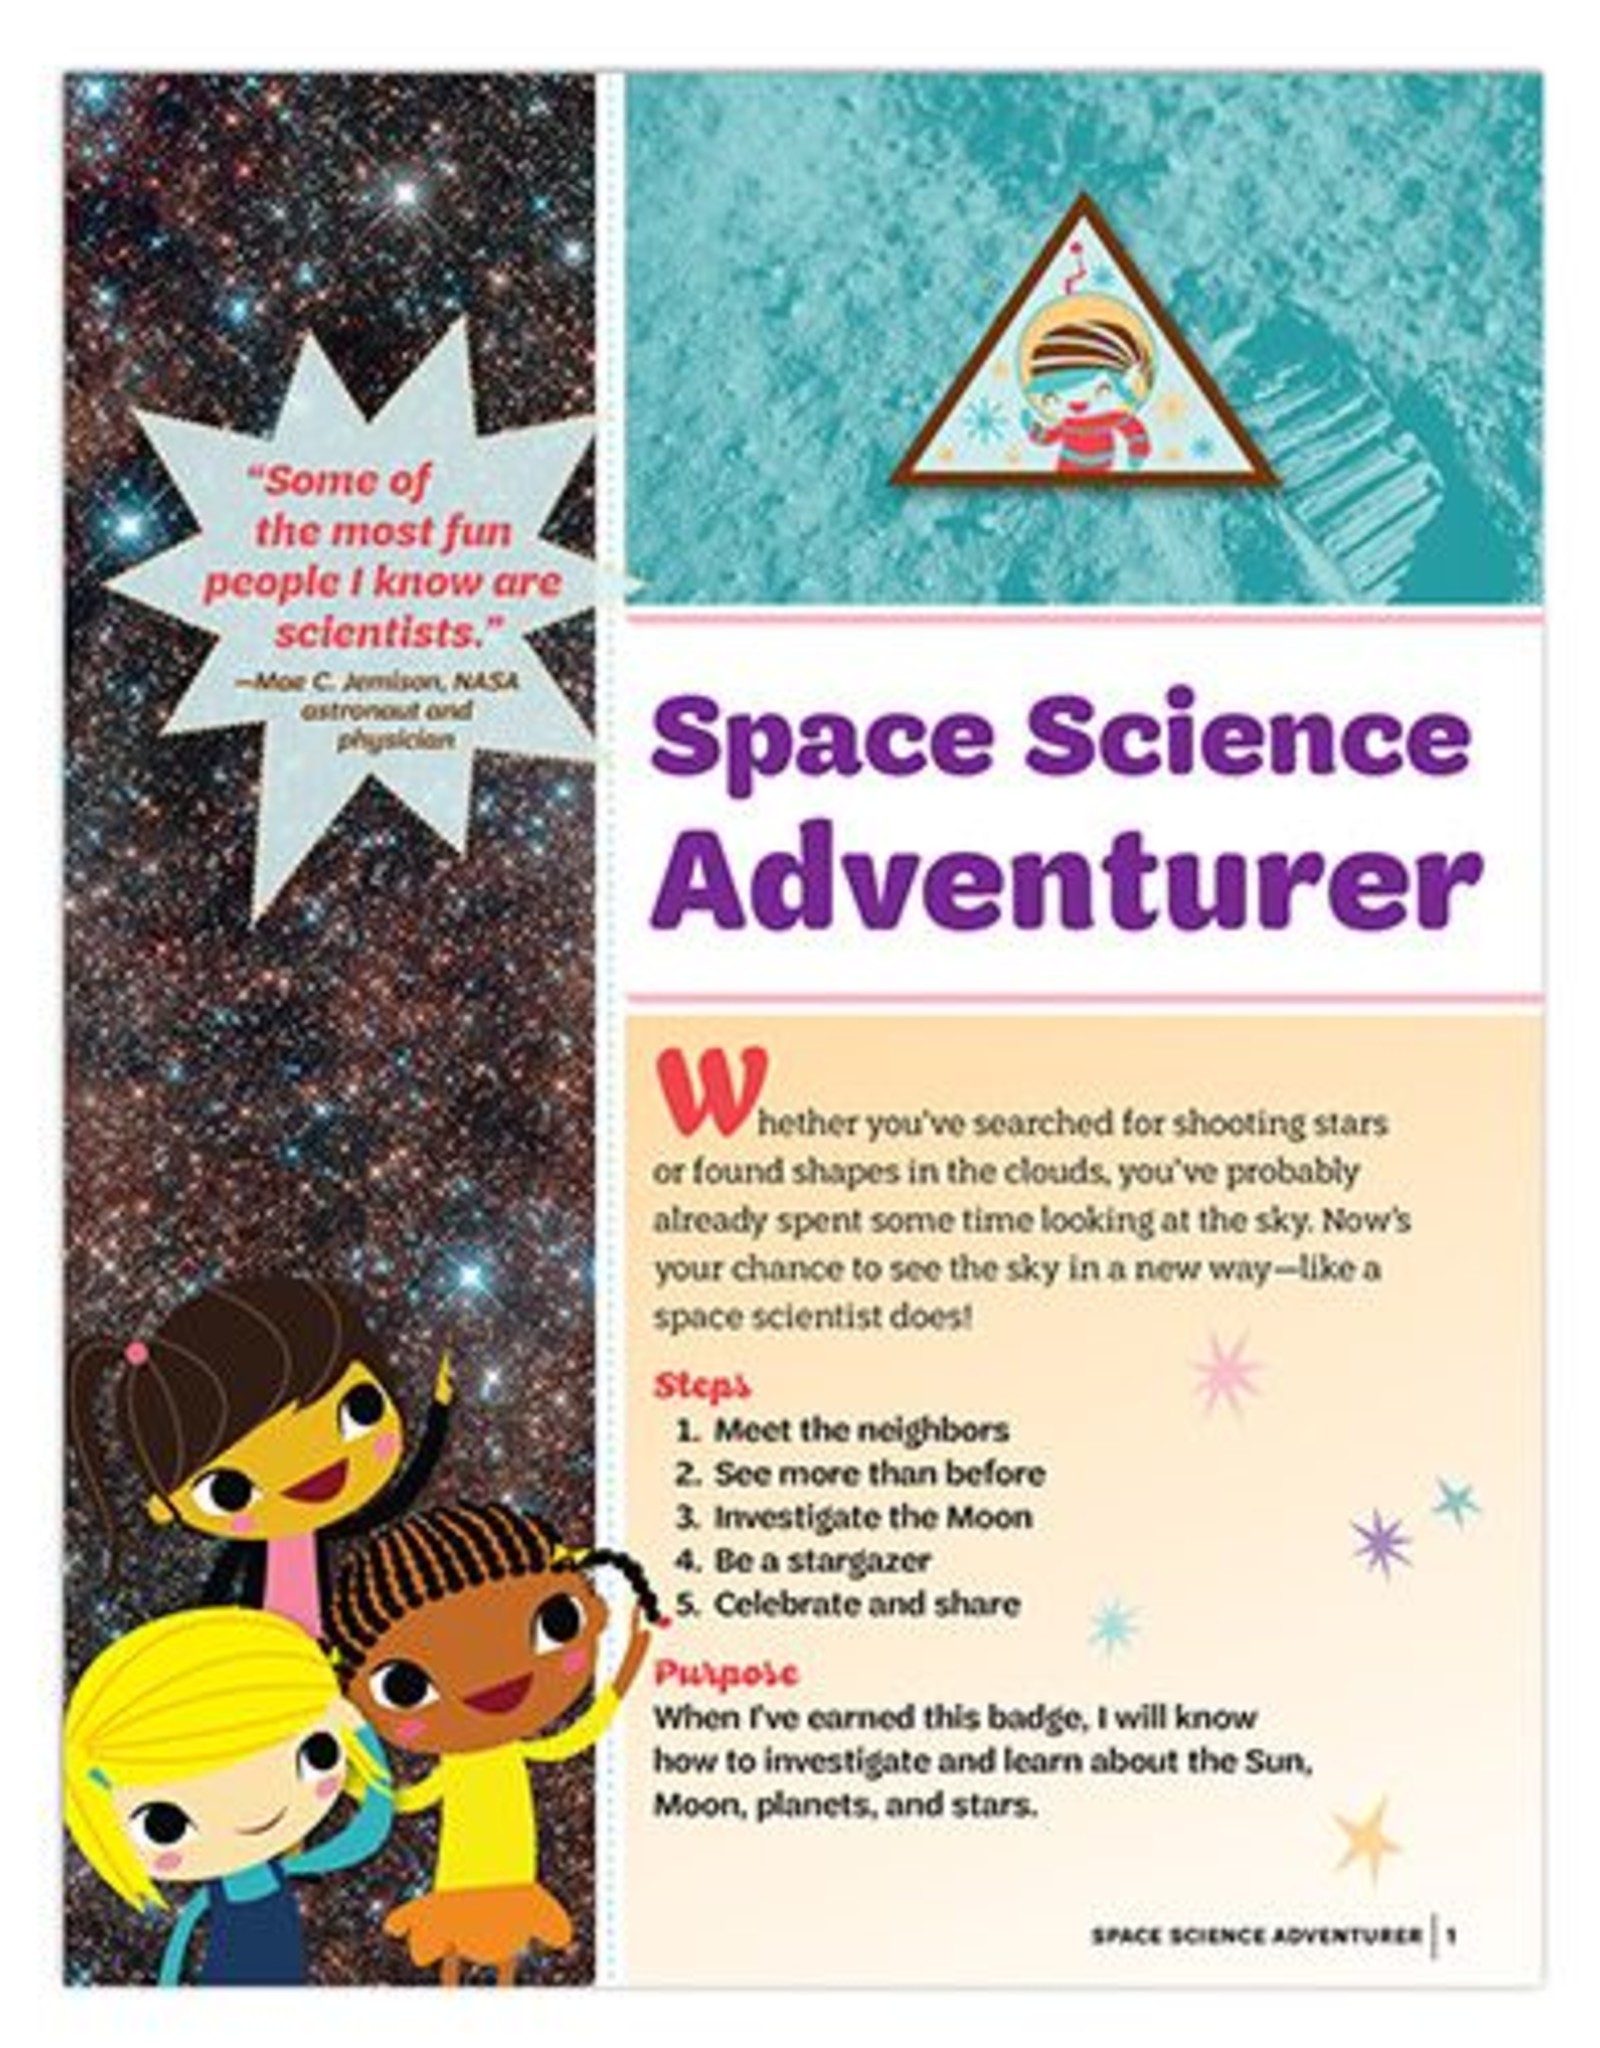 GIRL SCOUTS OF THE USA Brownie Space Science Adventurer Requirements